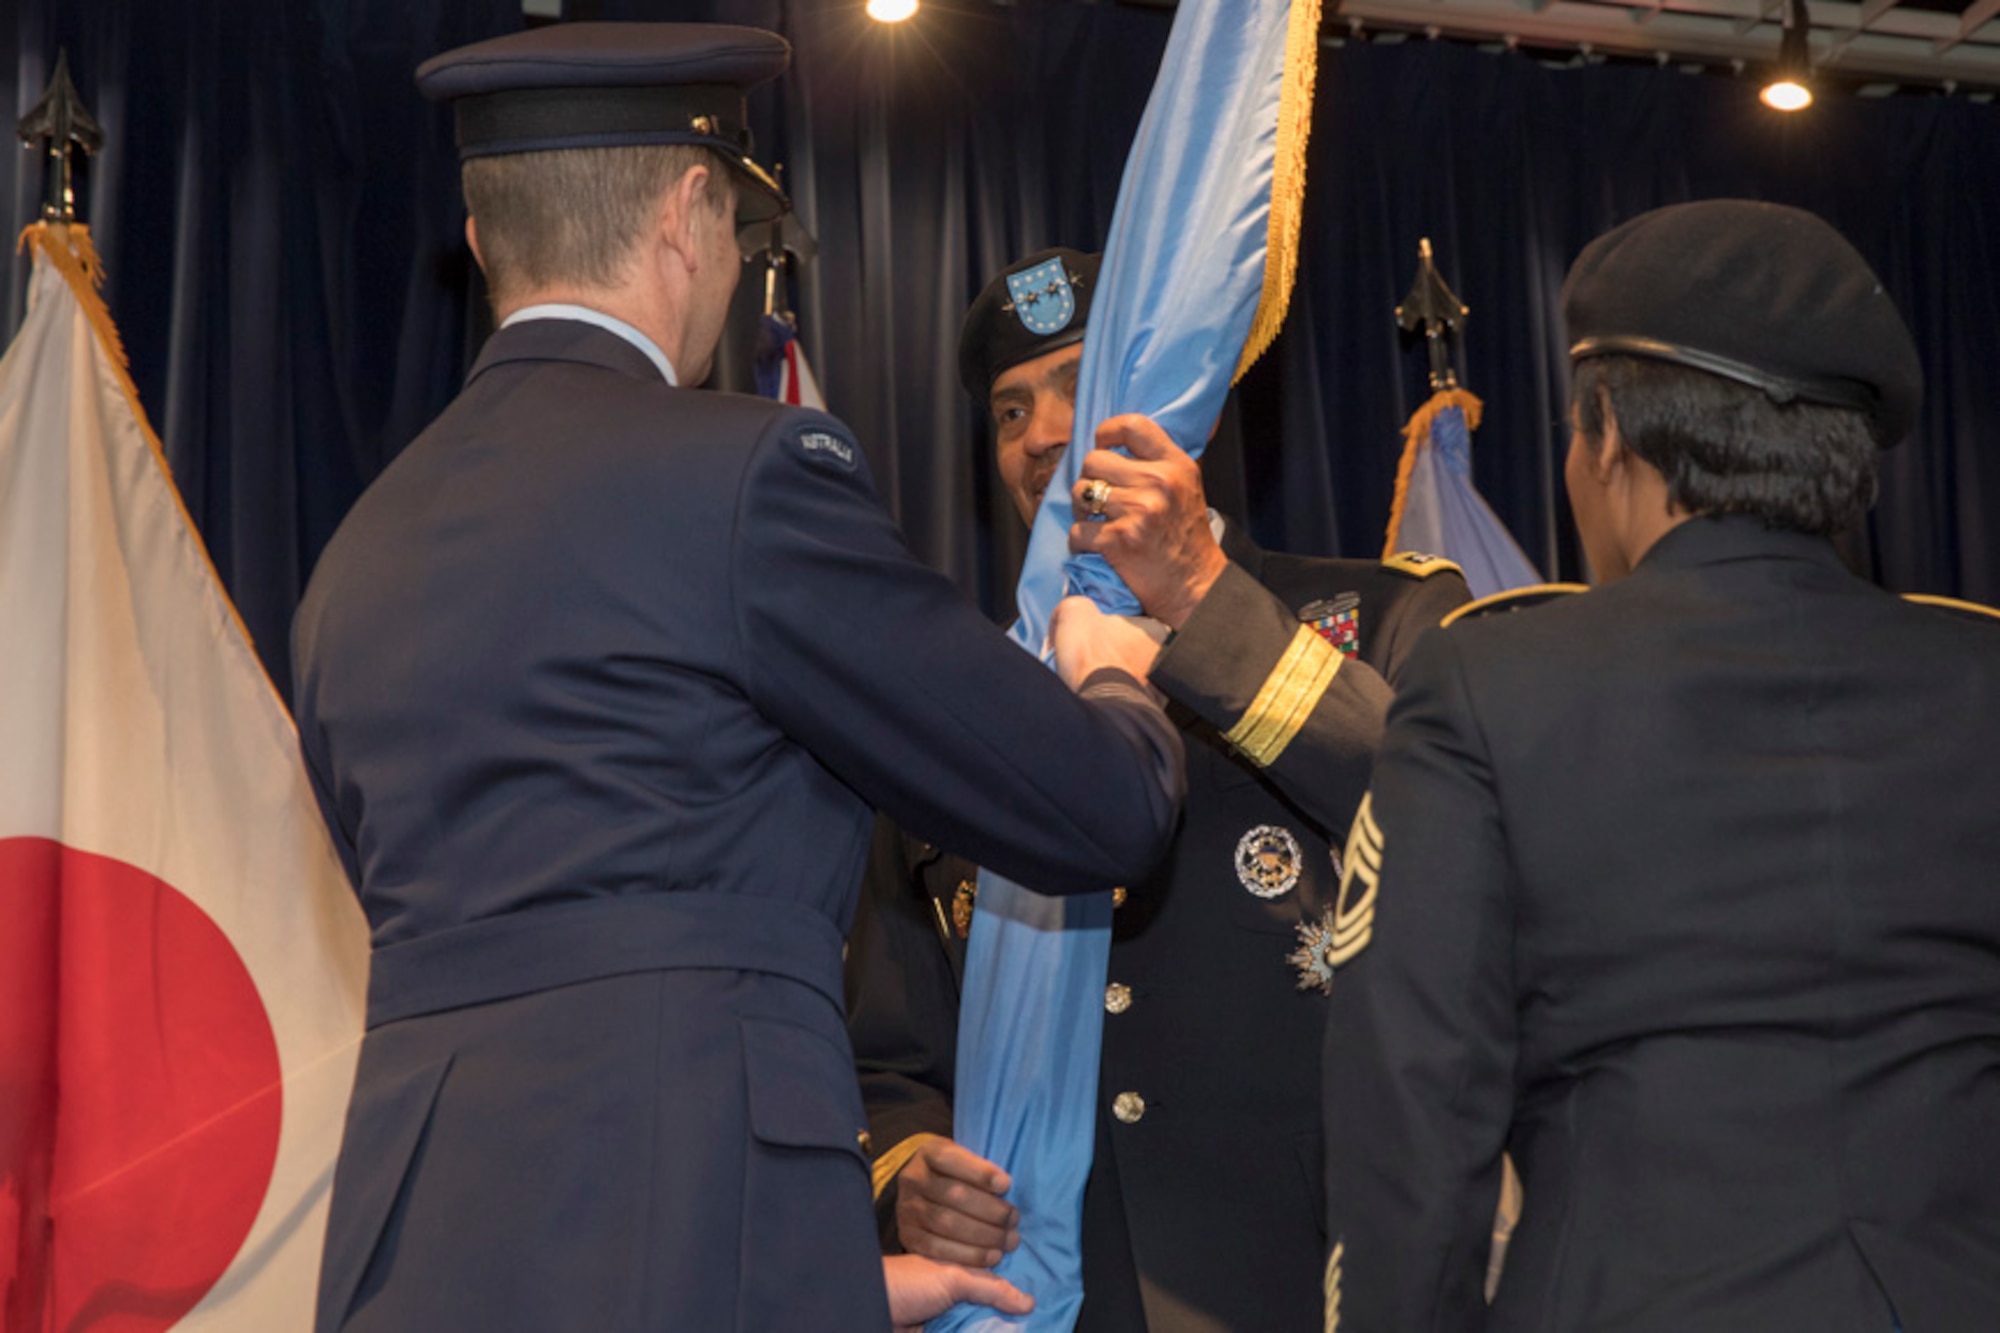 Royal Australian Air Force Group Captain Michael W. Jansen, outgoing United Nations Command (Rear) commander, passes the guidon to U.S. Army General Vincent K. Brooks, United Nations Command, Combined Forces Command and U.S. Forces Korea commanding general during a change of command ceremony